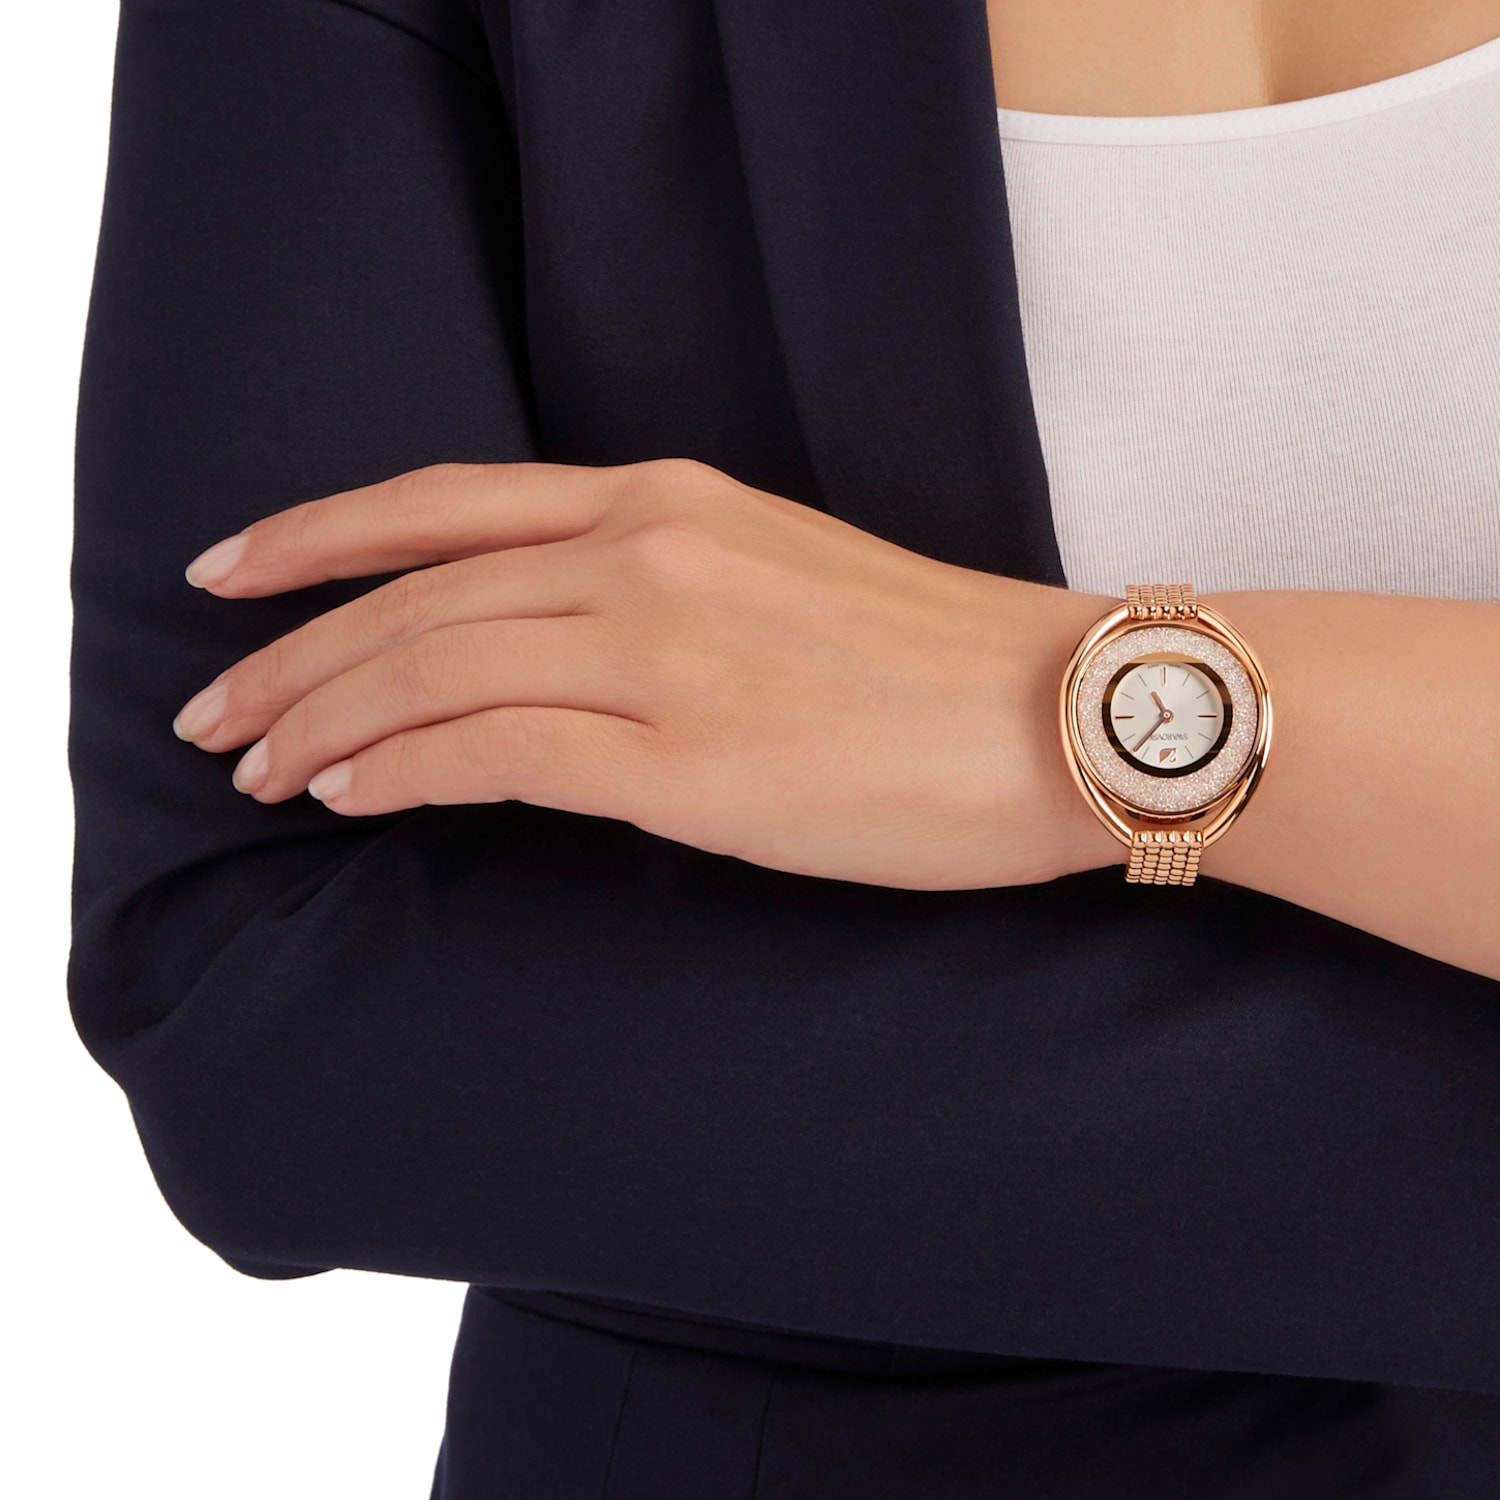 Crystalline Oval Watch, Metal bracelet, White, Rose-gold tone PVD